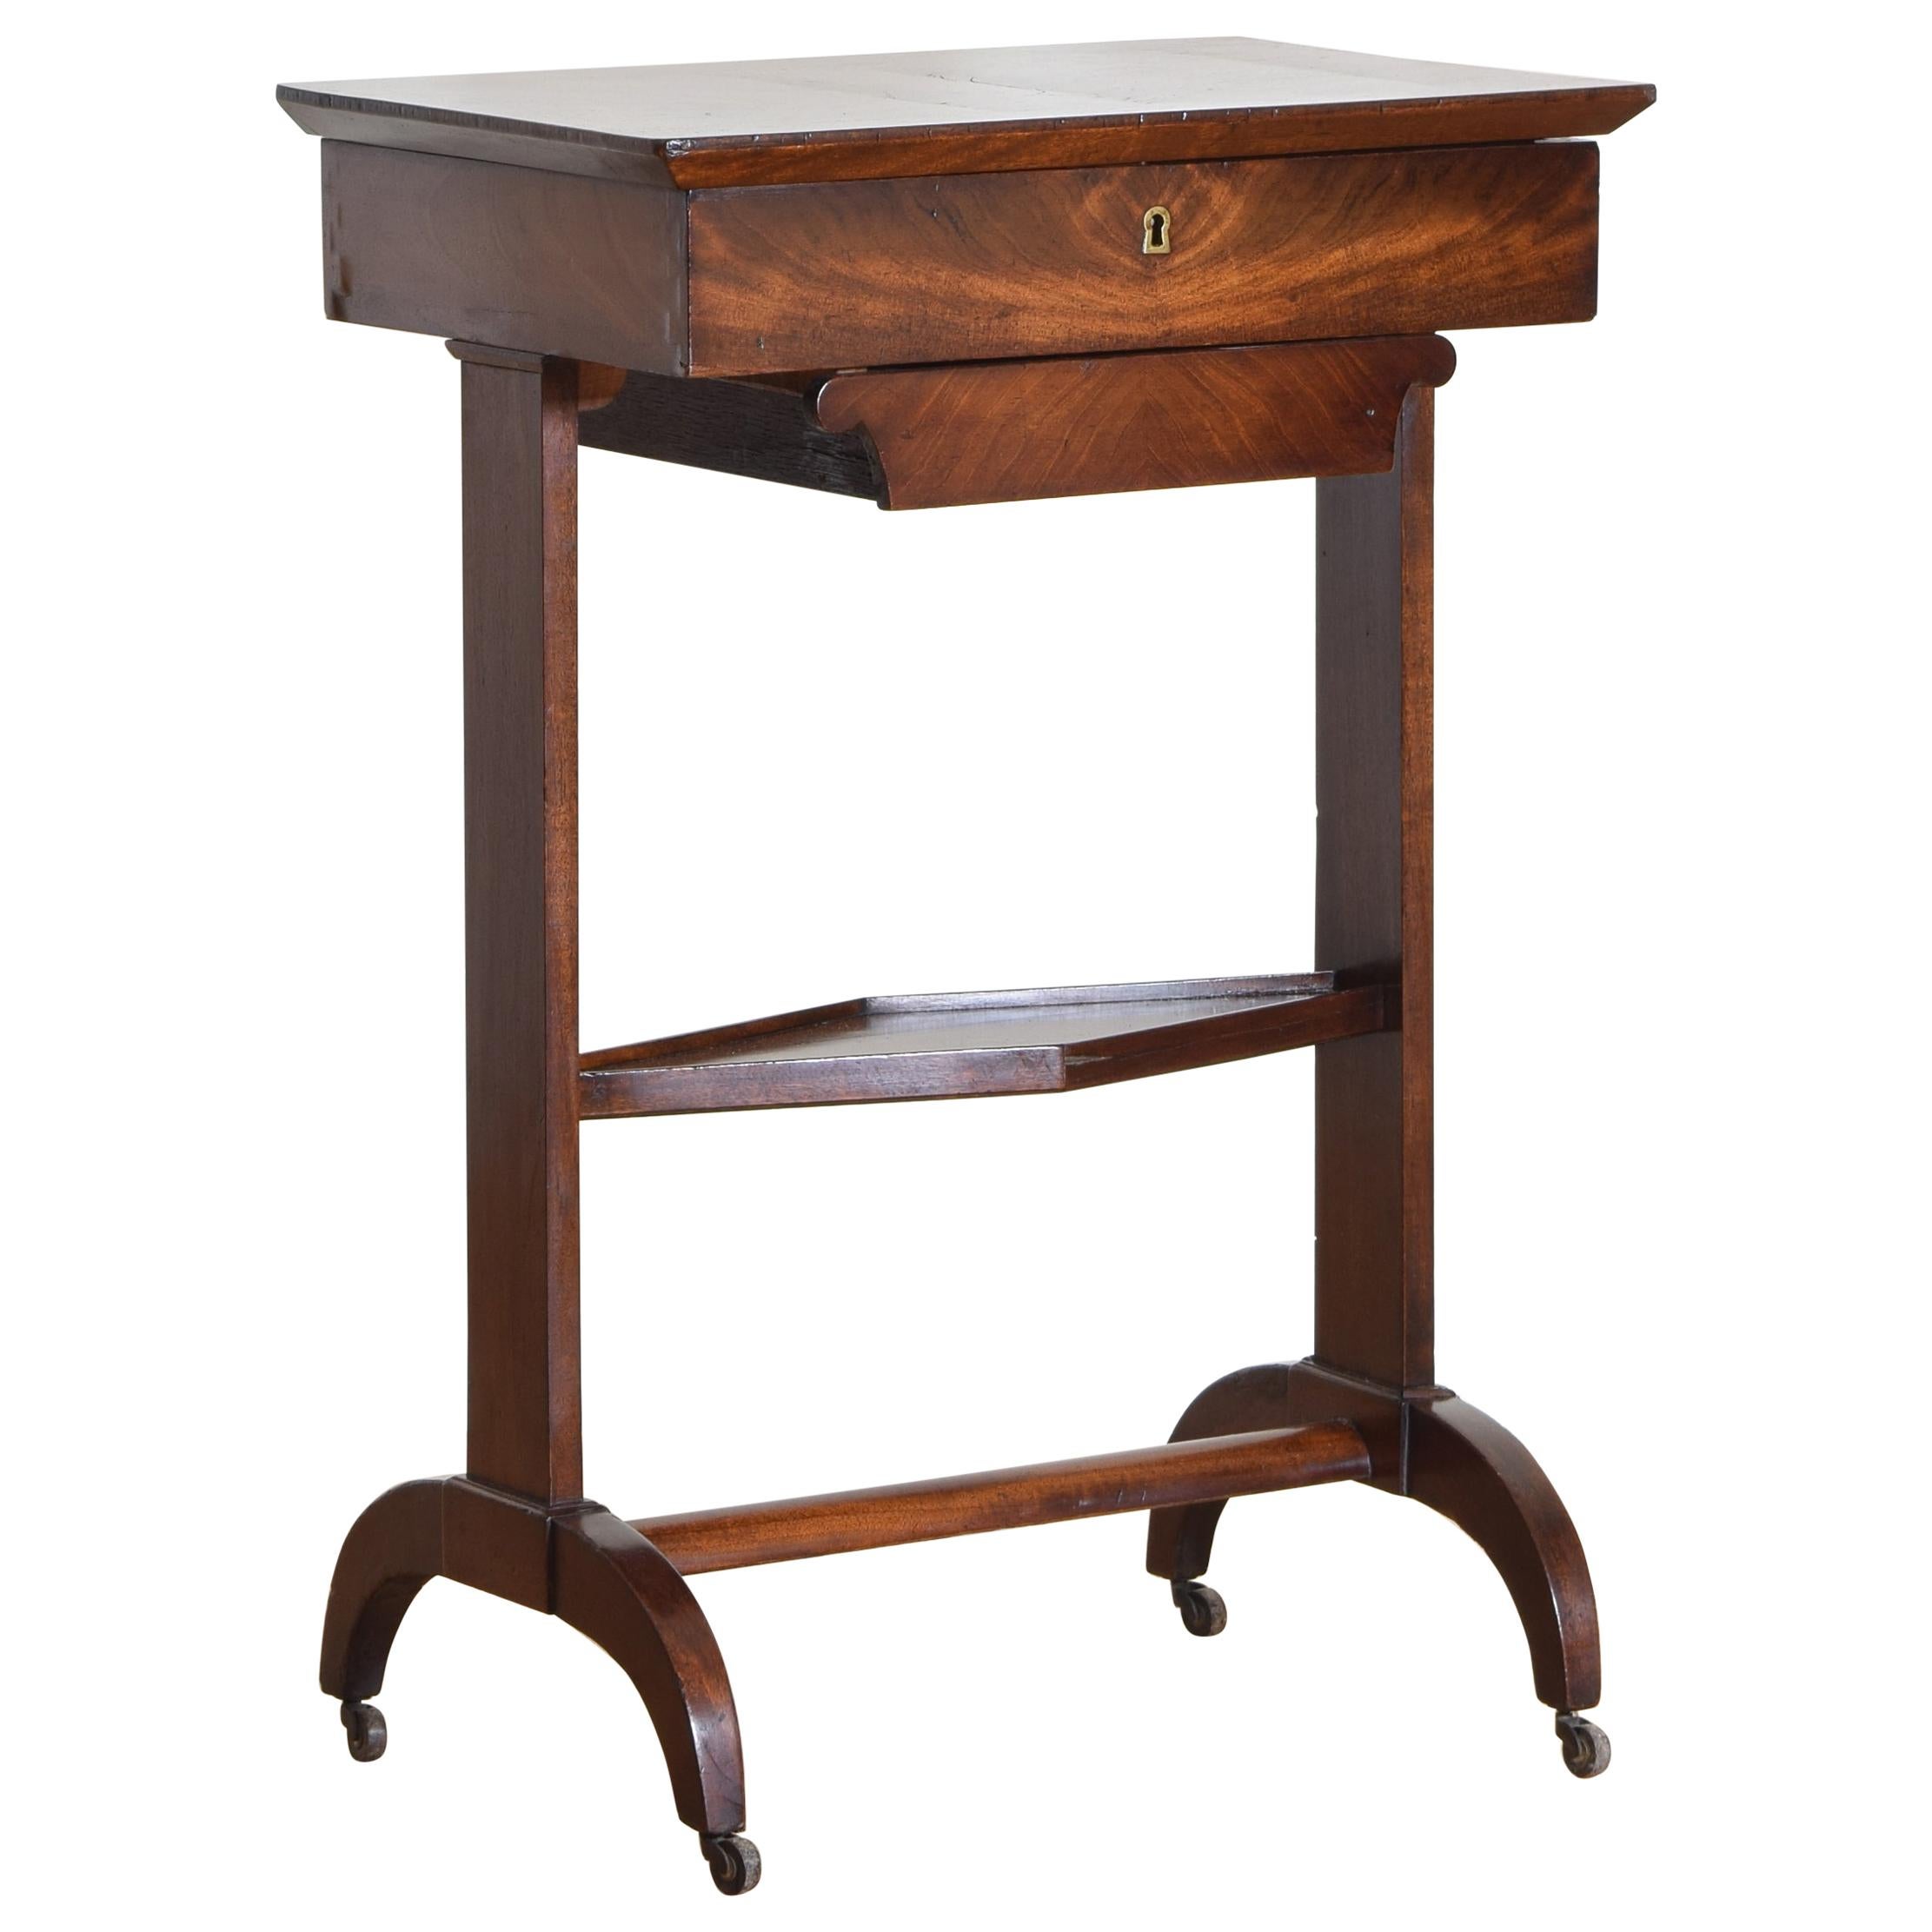 French Restauration Period Mahogany Hinged Top Vanity or Work Table, circa 1825 For Sale